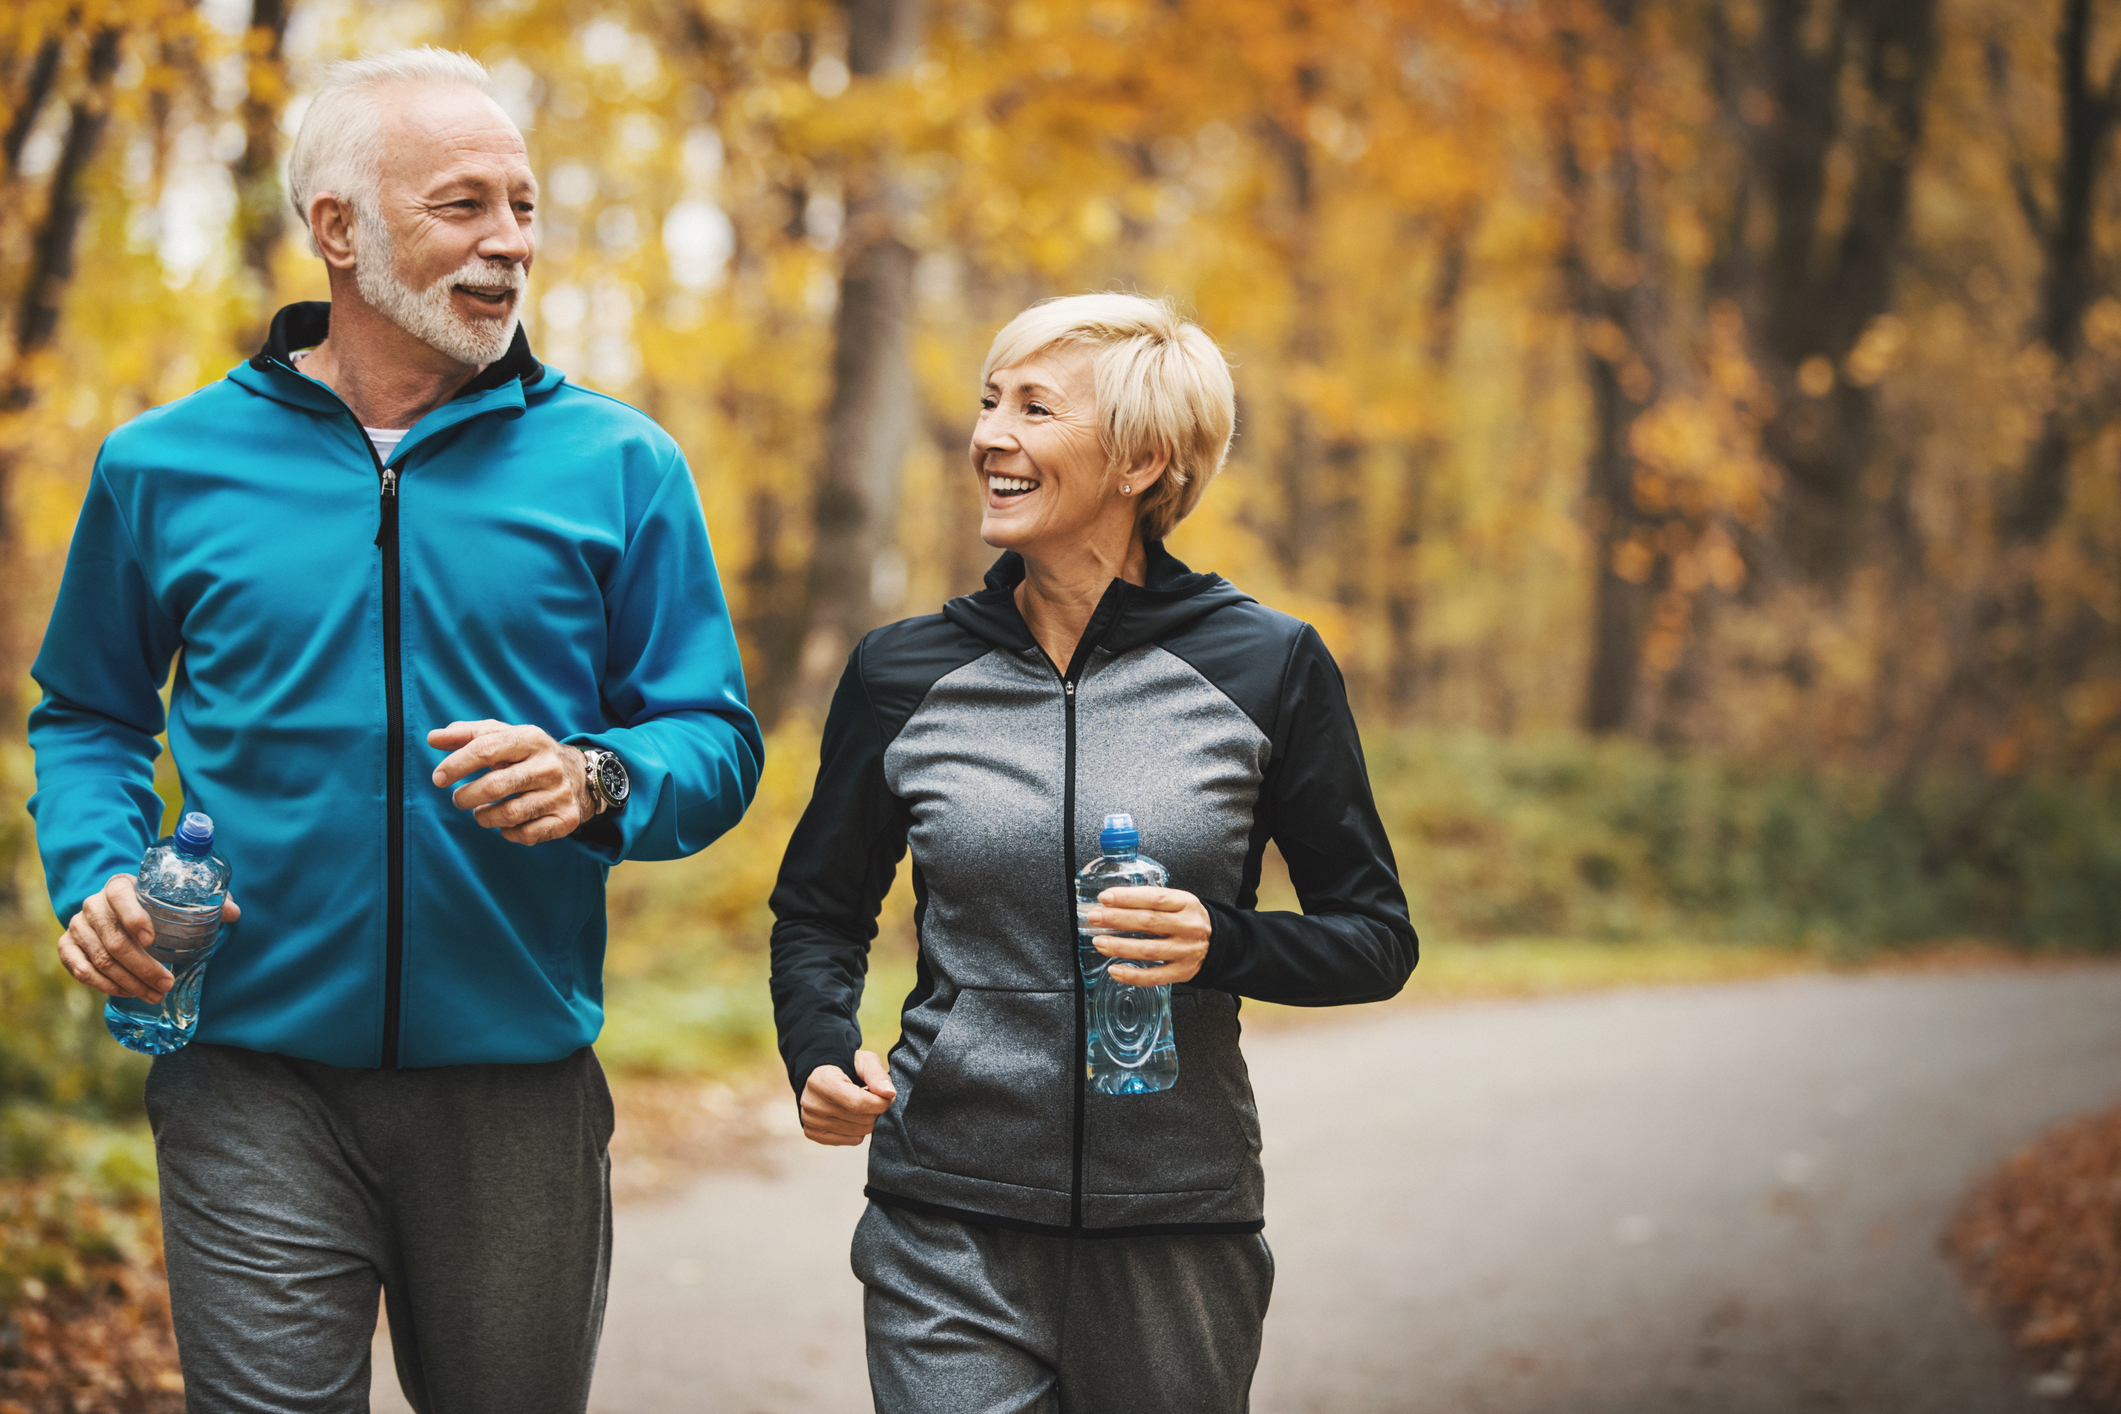 Senior-couple-jogging-in-a-forest.-905501696_2125x1416.jpeg